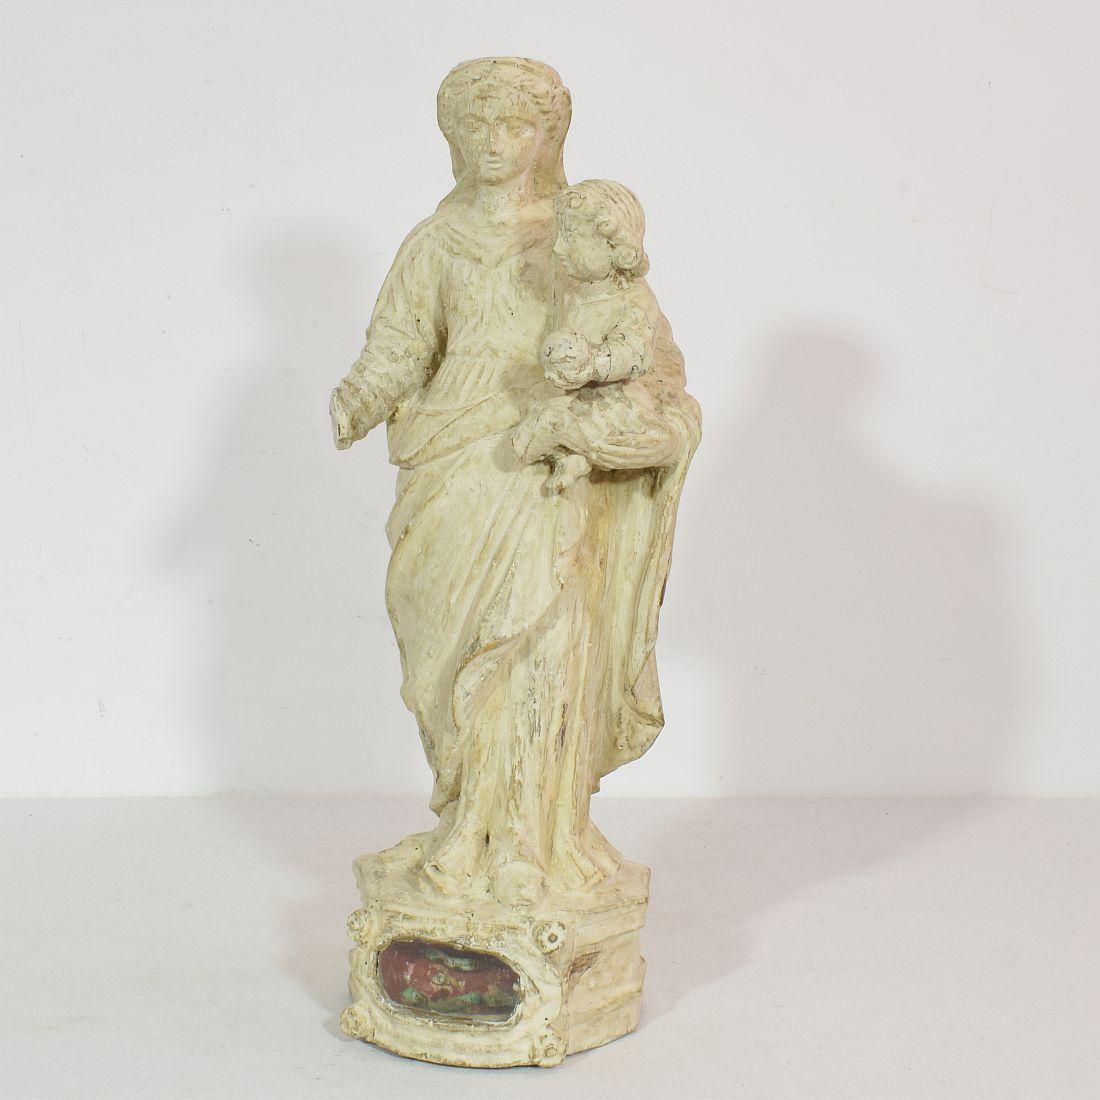 Unique hand carved madonna with child and small relique.
France, circa 1750
Weathered and small losses.